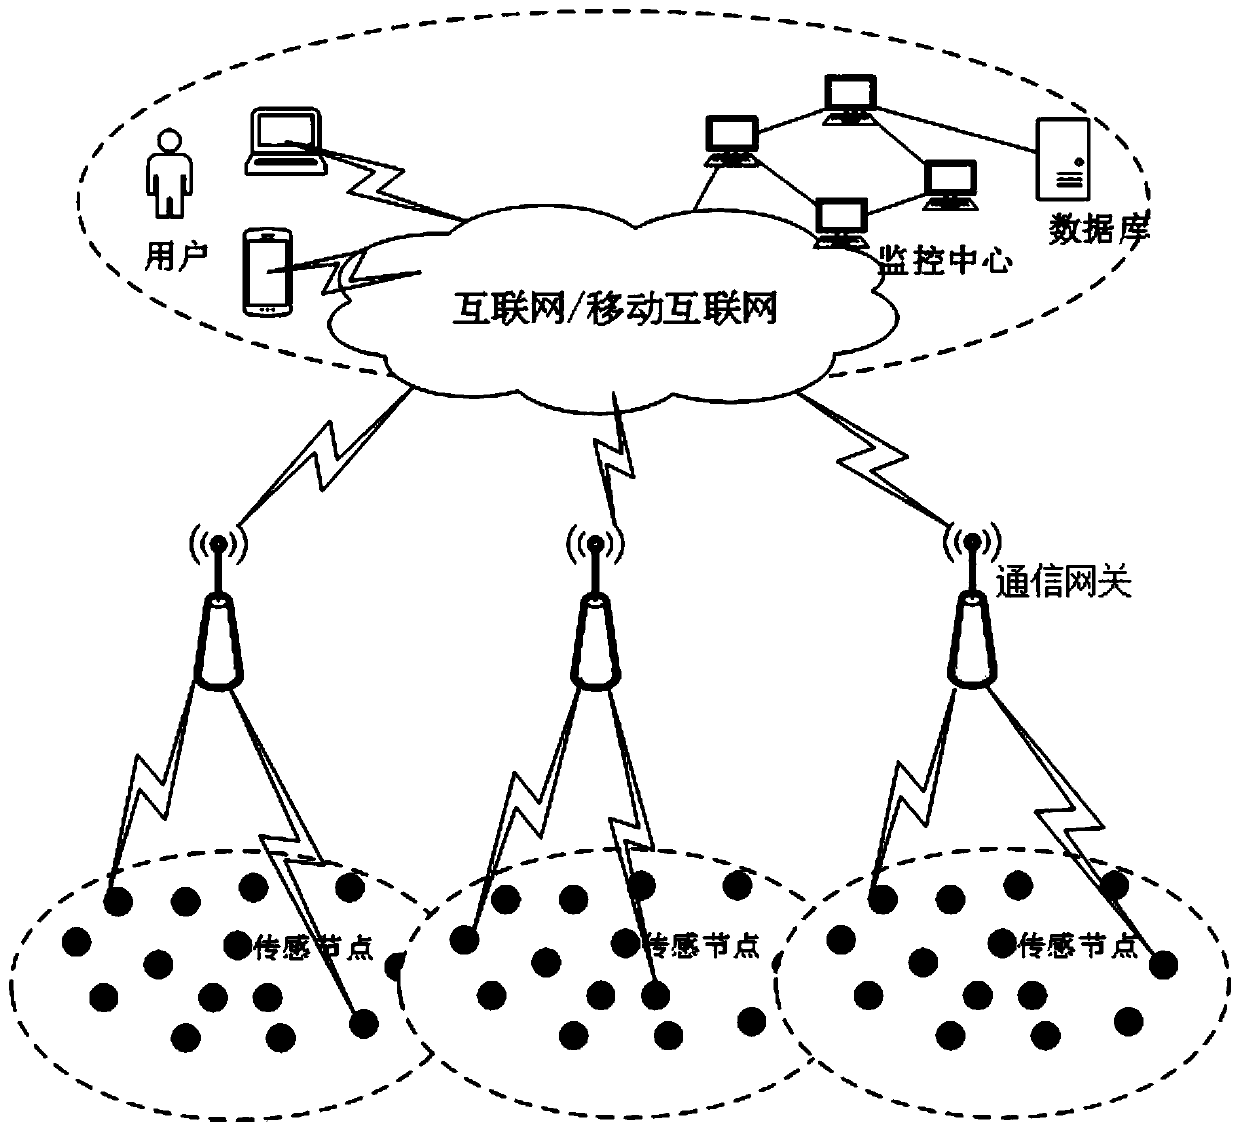 Bandwidth prediction method and system for power distribution communication service